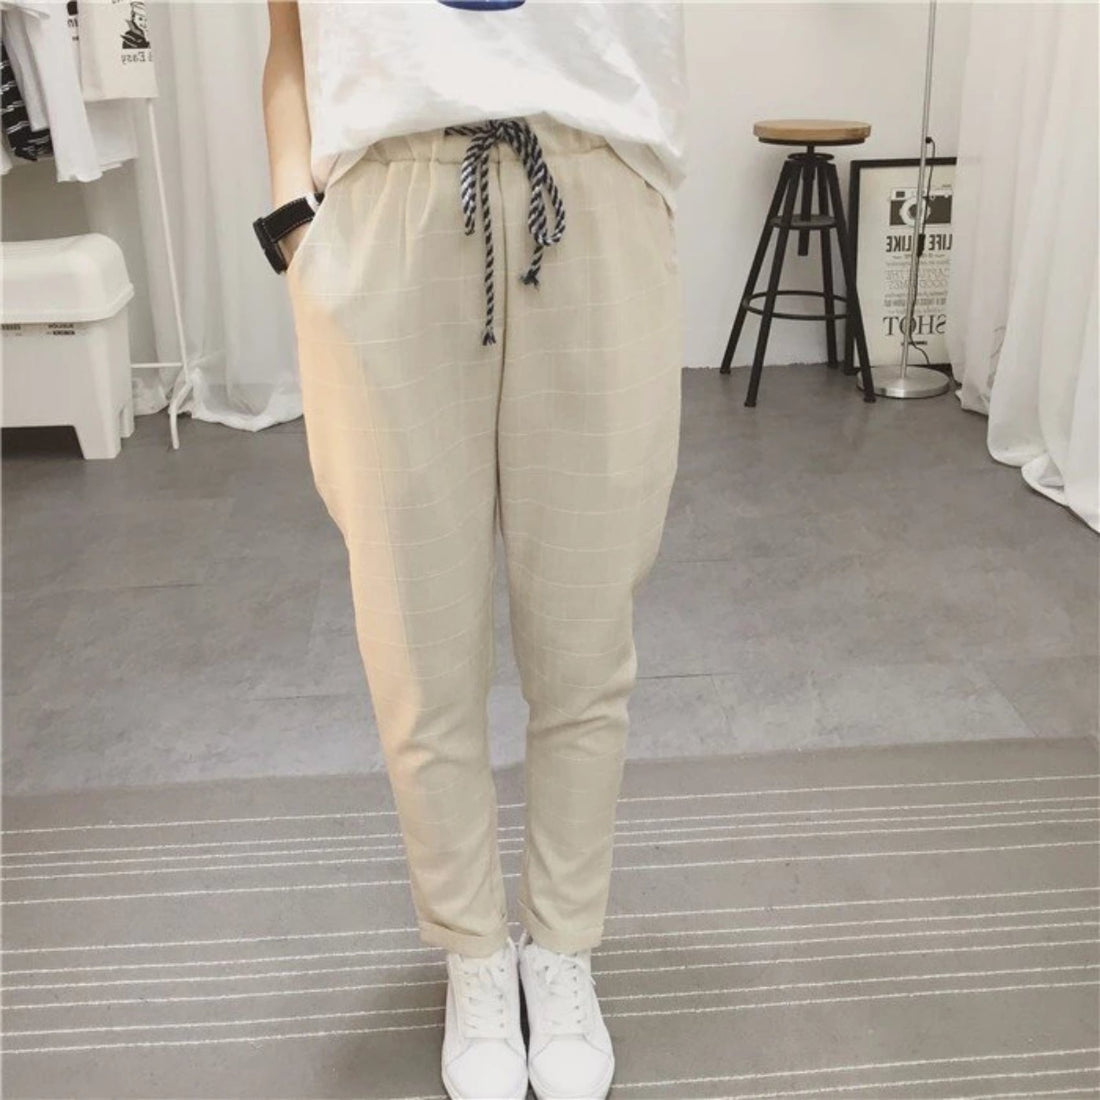 Women's Summer/Spring Casual Loose Cotton Plaid Pants